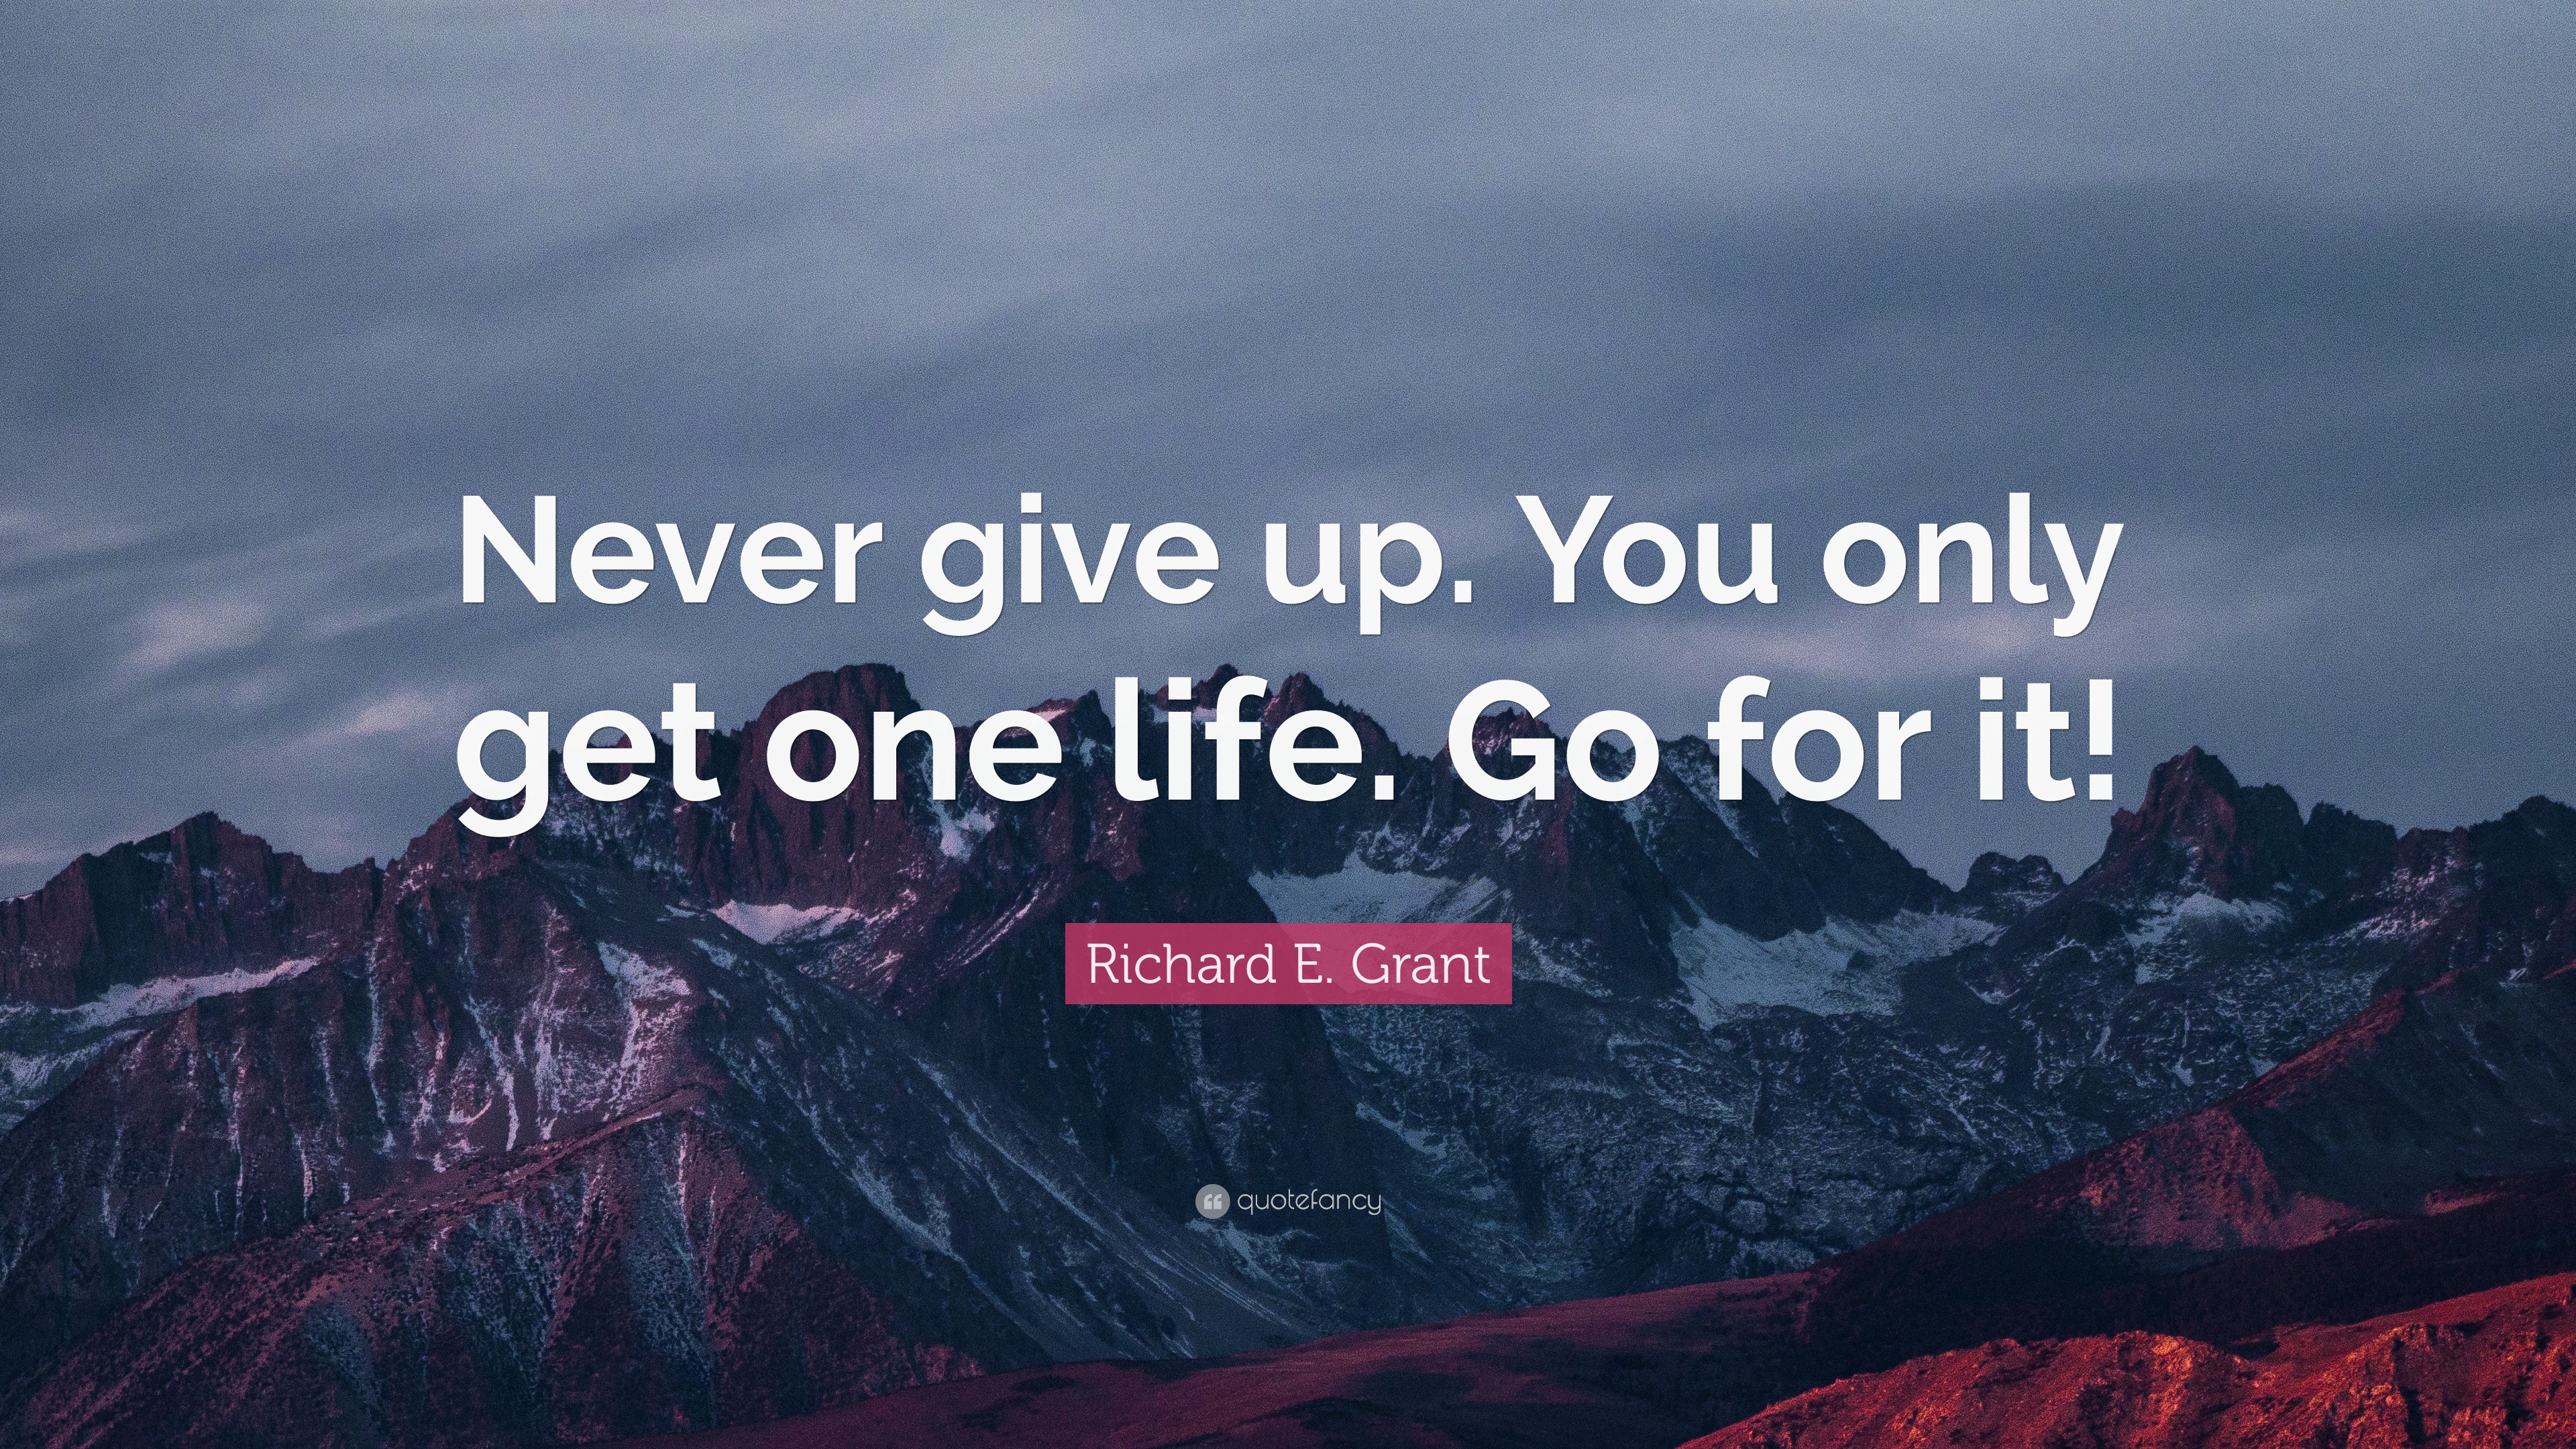 Richard E Grant Quote “Never give up You only one life